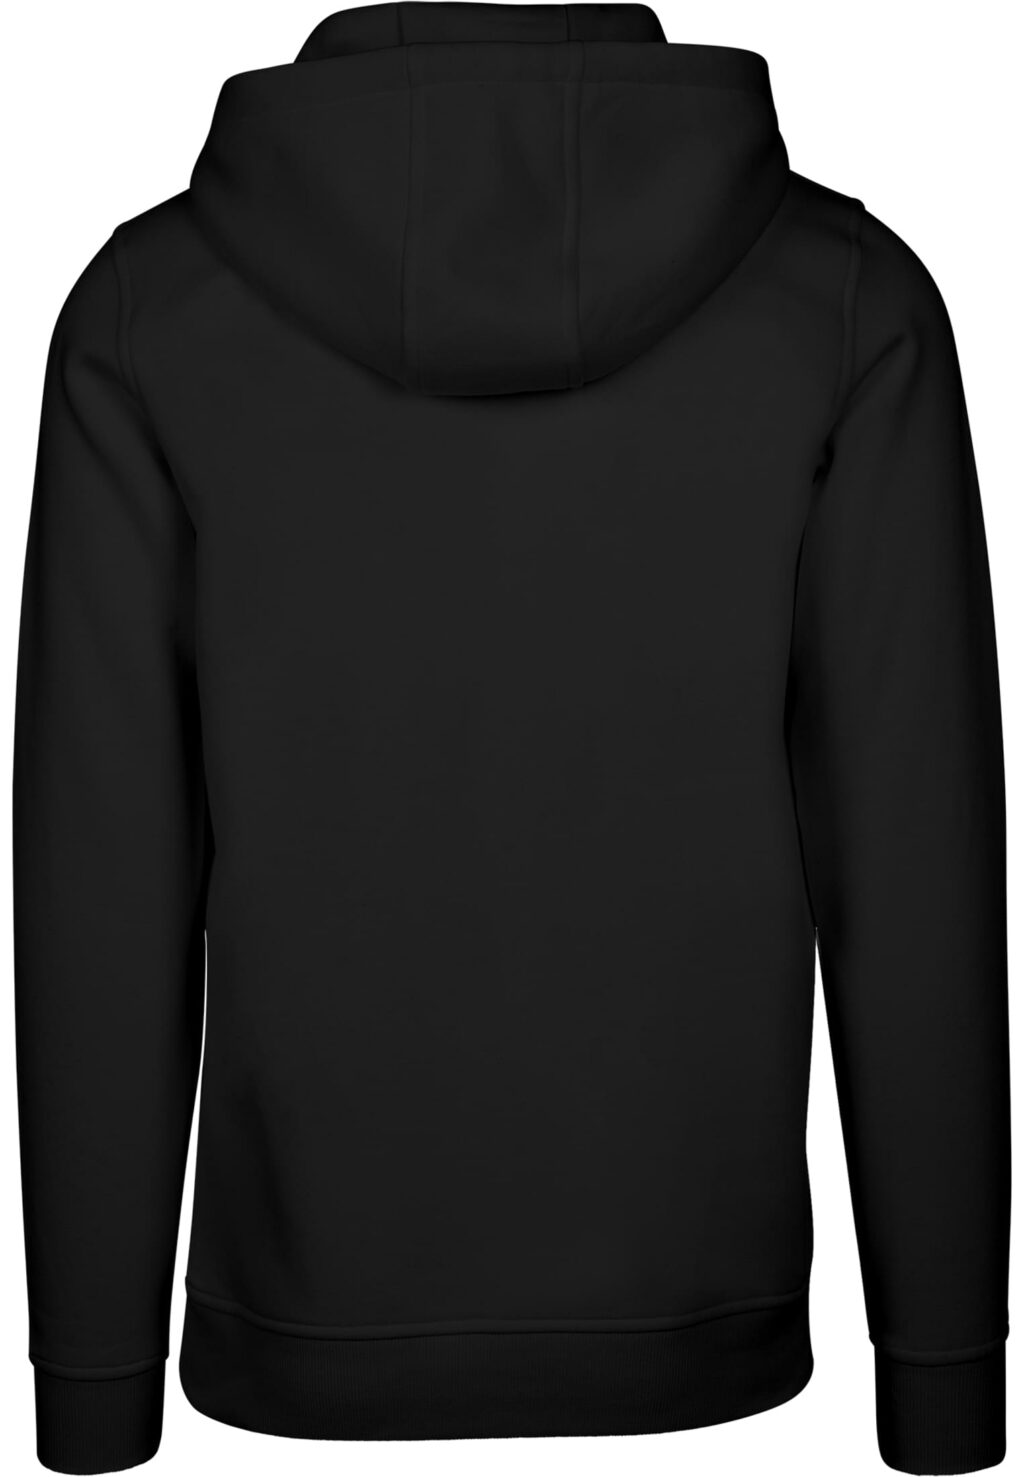 Become The Change Butterfly Hoody black MT3029